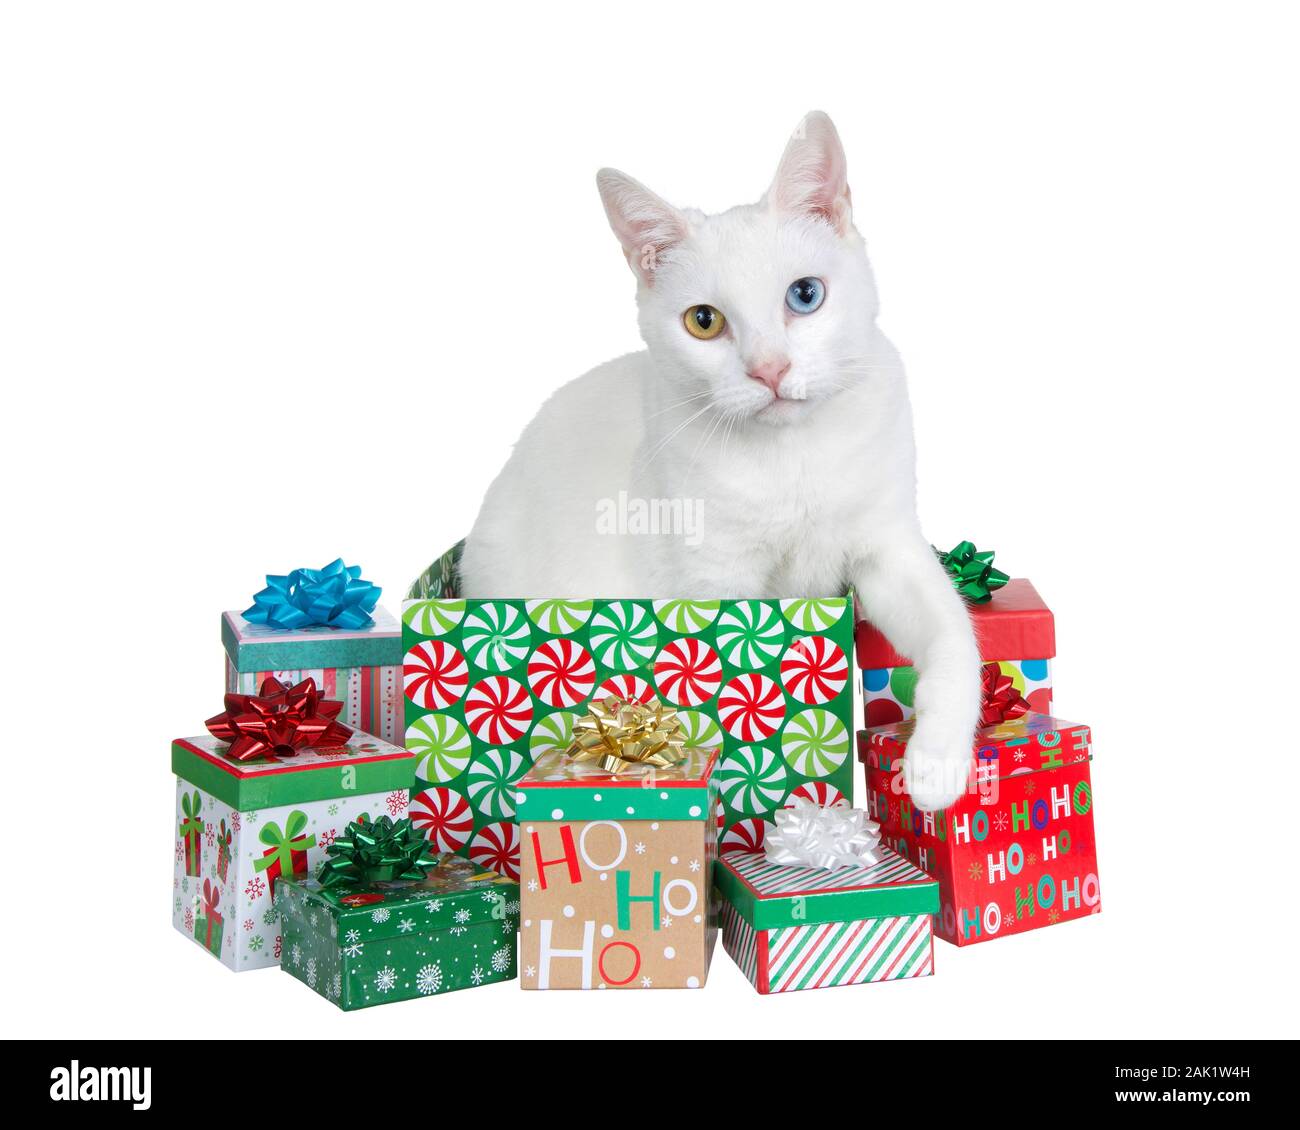 White cat with heterochromia, odd eyes, popping out of a colorful Christmas present surrounded by smaller boxes isolated on white background. Stock Photo